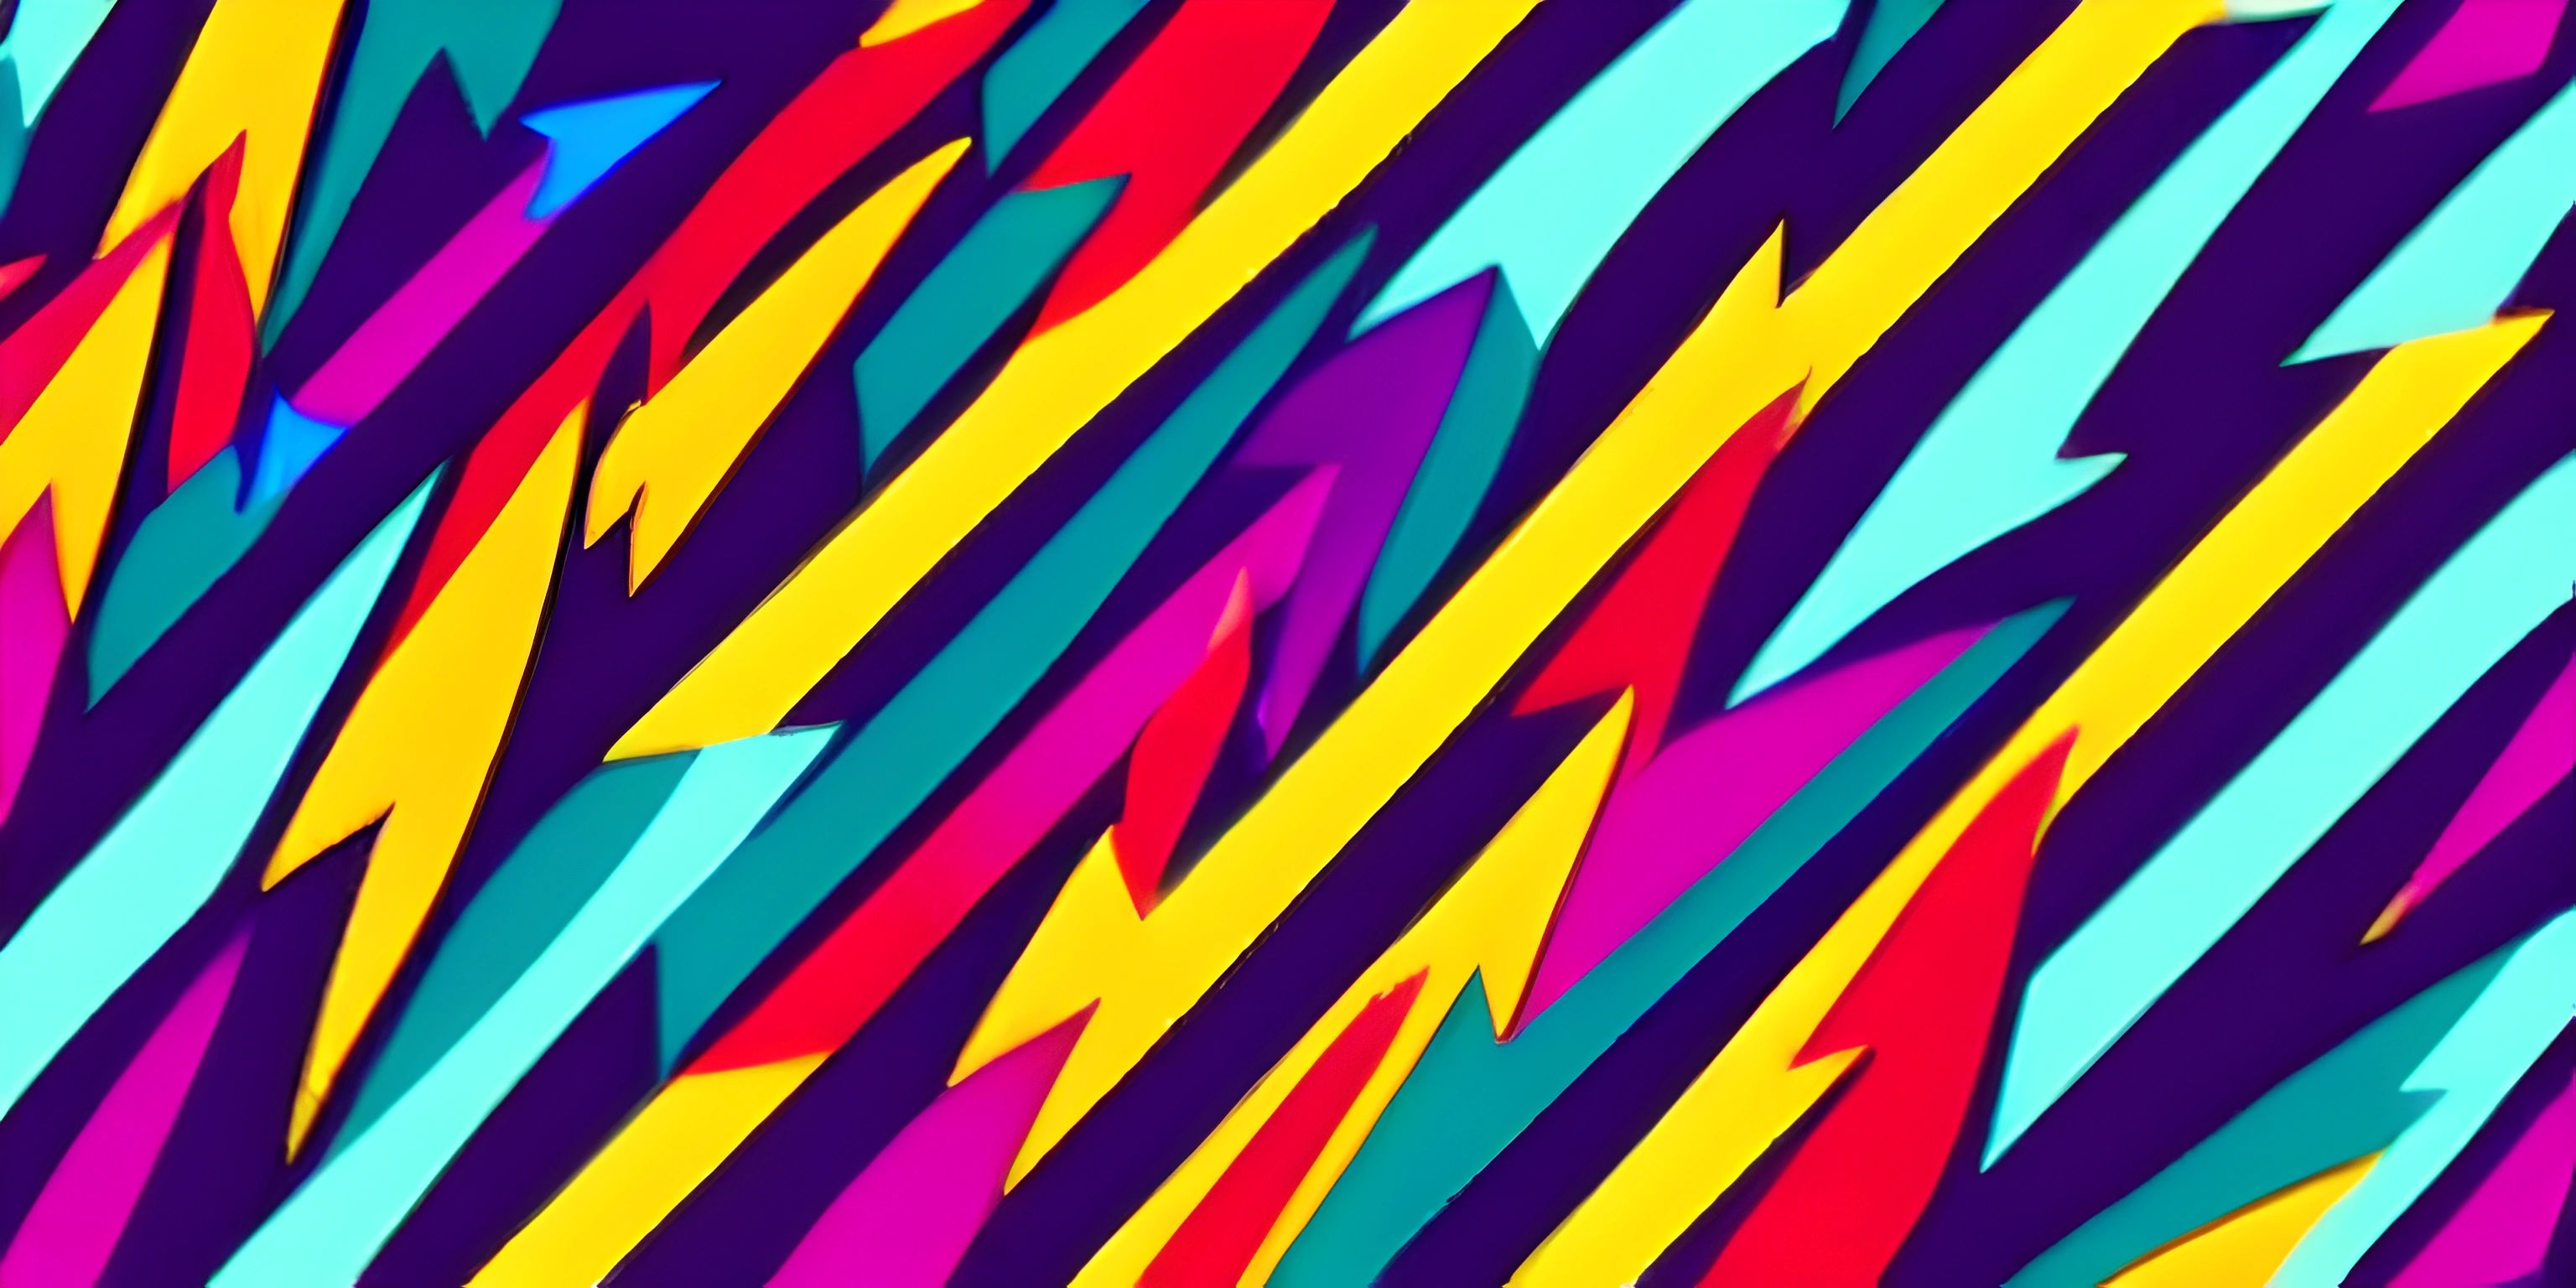 a pattern with bright colored arrows in different colors and patterns is seen here on a black background